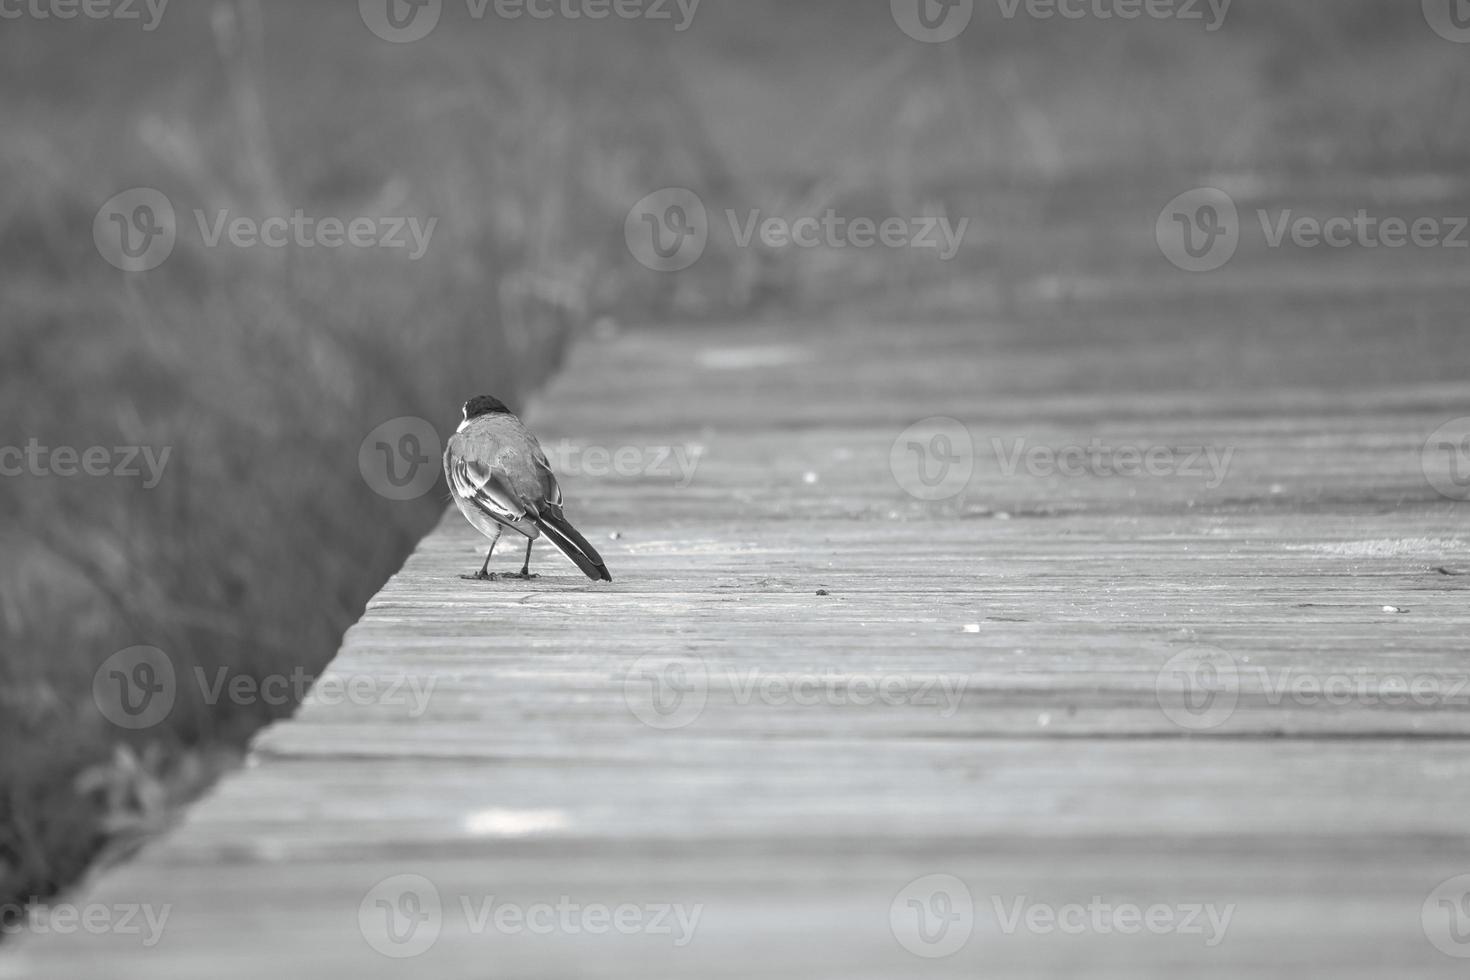 Wagtail in black and white shot, on a footbridge at the water. Songbird photo